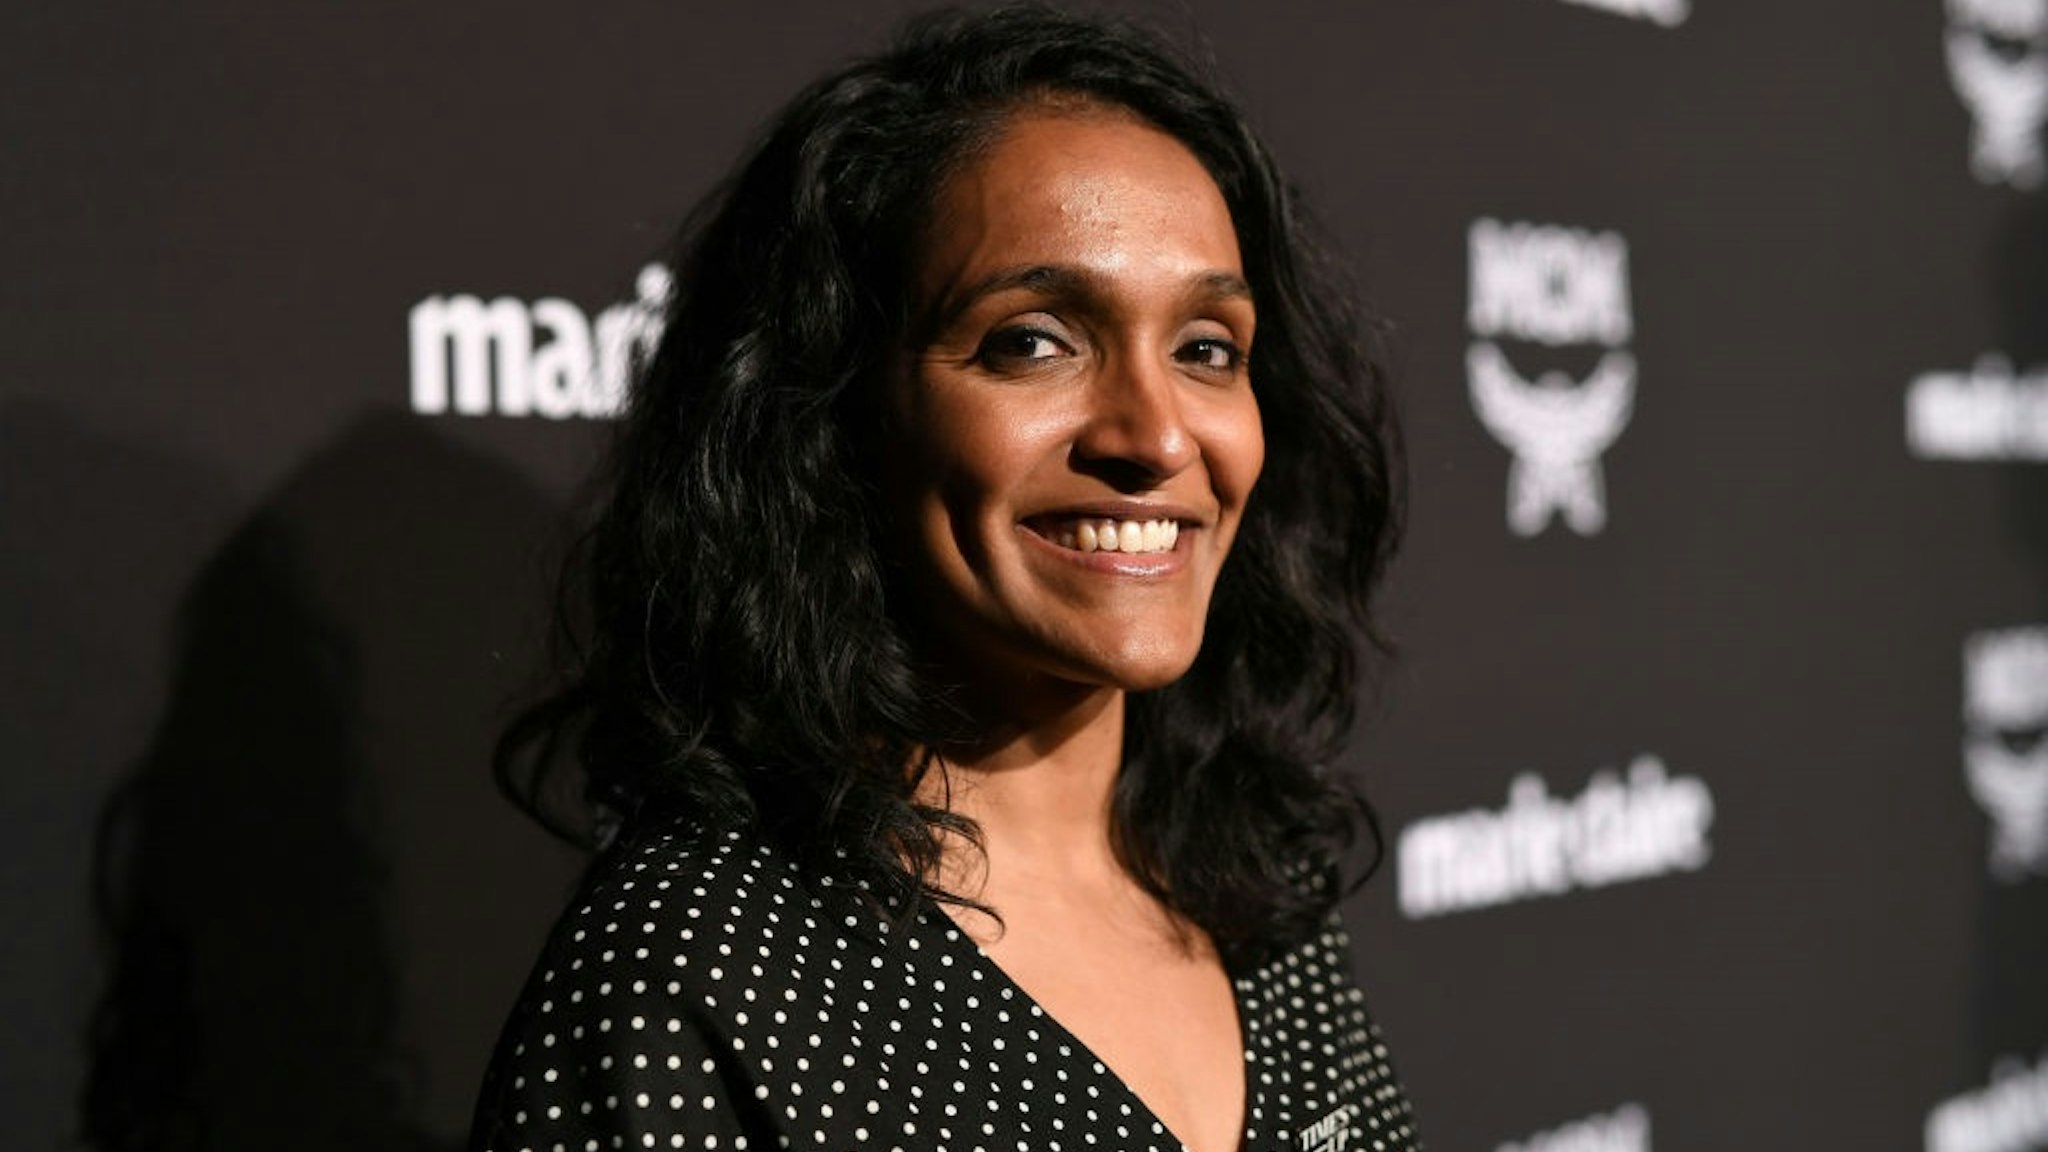 LOS ANGELES, CA - MARCH 12: Nithya Raman is seen as Marie Claire honors Hollywood's Change Makers on March 12, 2019 in Los Angeles, California.